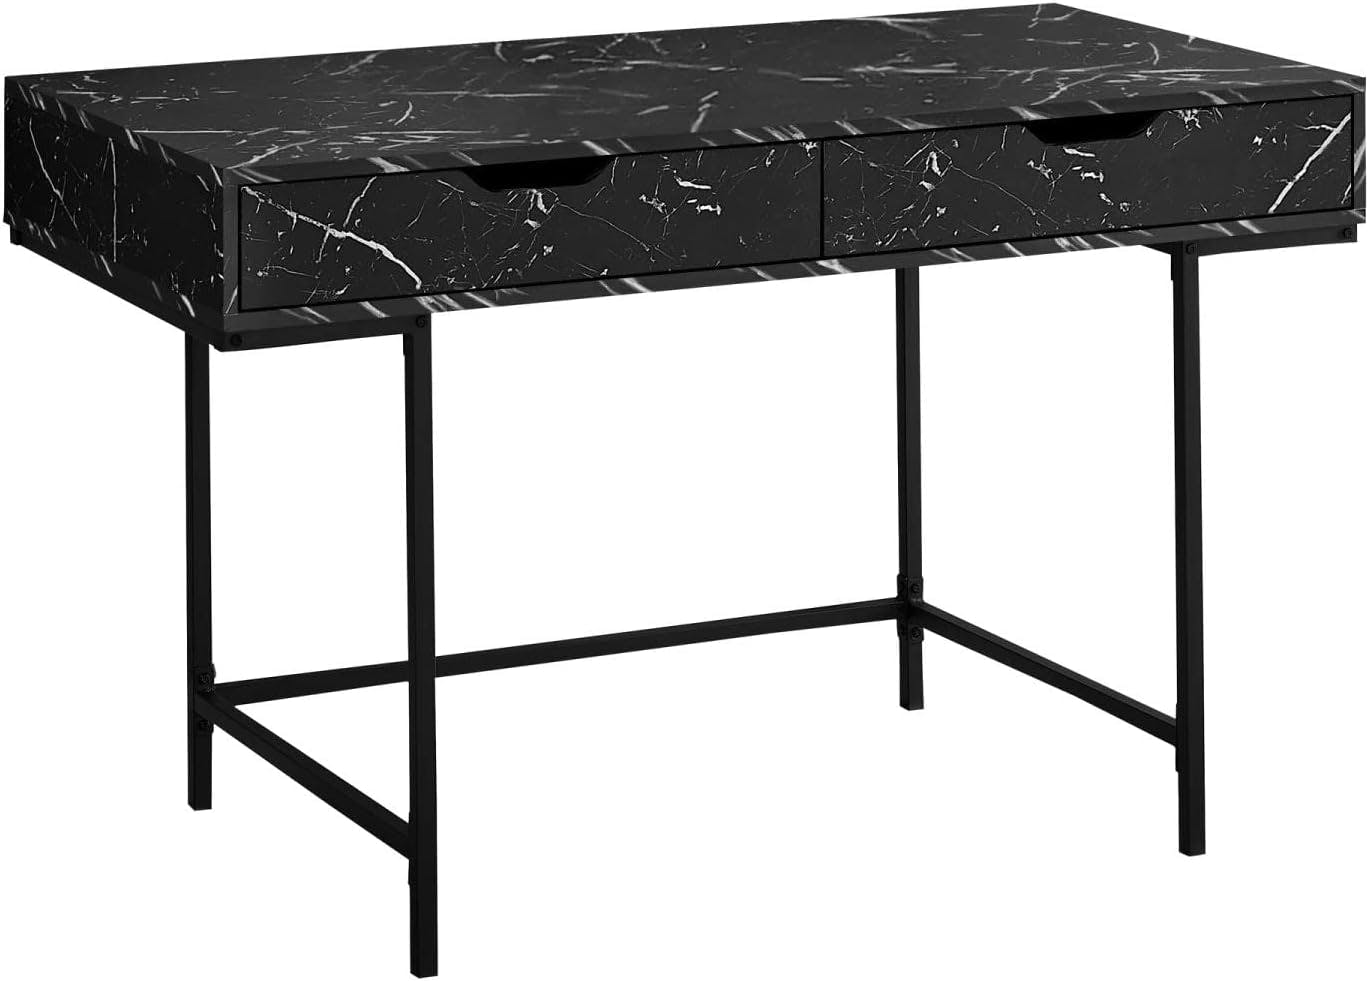 Contemporary Black Marble-Look Home Office Desk with Dual Drawers